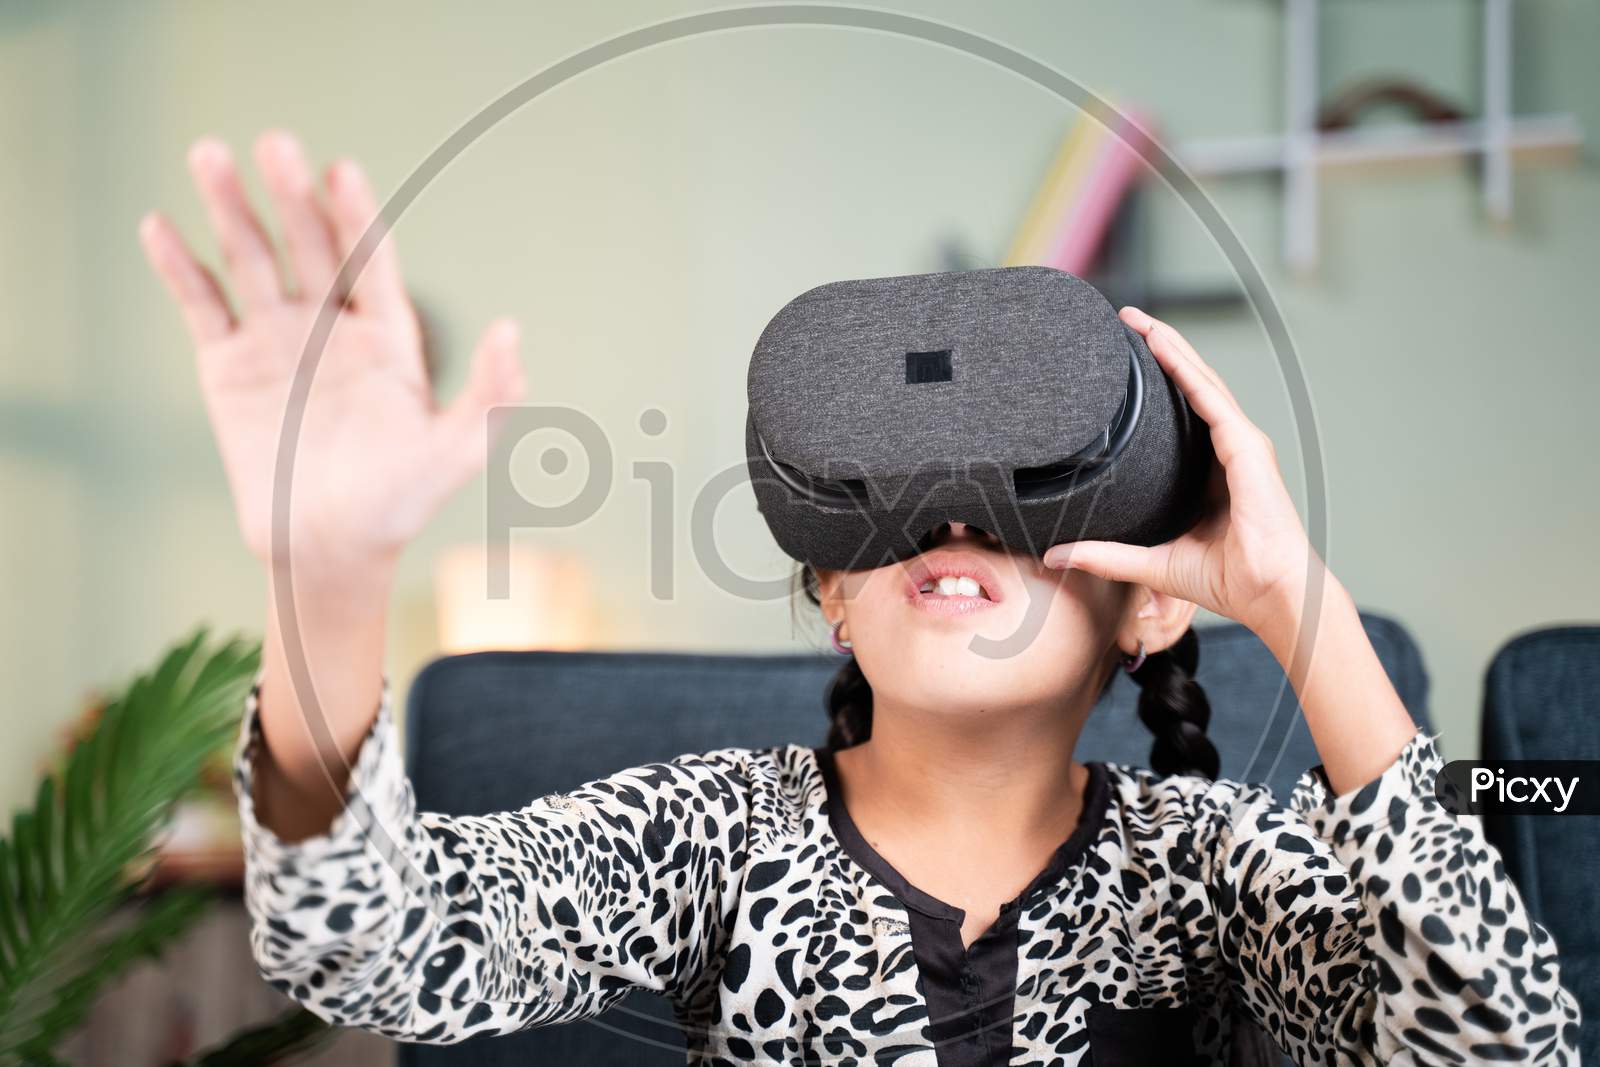 Young Girl Kid With Vr Or Virtual Reality Goggles Feeling Or Enjoying The 360 Degree Virtual Environment At Home - Concept Of Showing Modren Vr Technology In Modern Lifestyle.